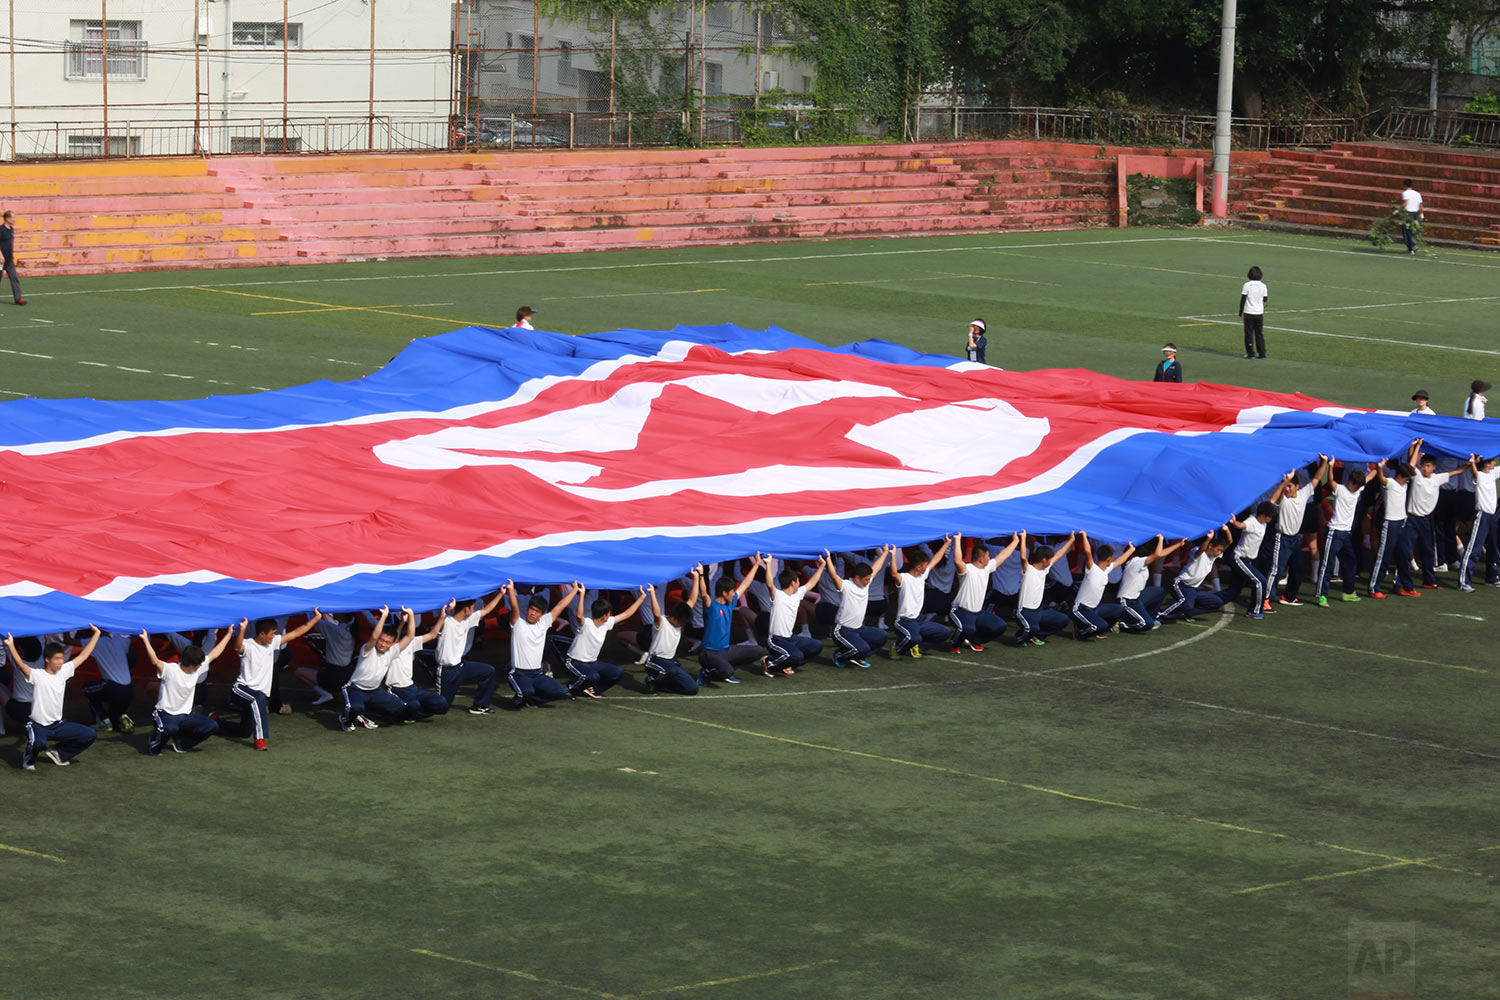  In this Sept. 26, 2017, photo, a student flag team practices a performance waving red, white and blue banners to form th North Korea national flag at a Tokyo Korean high school in Tokyo. (AP Photo/Eugene Hoshiko) 